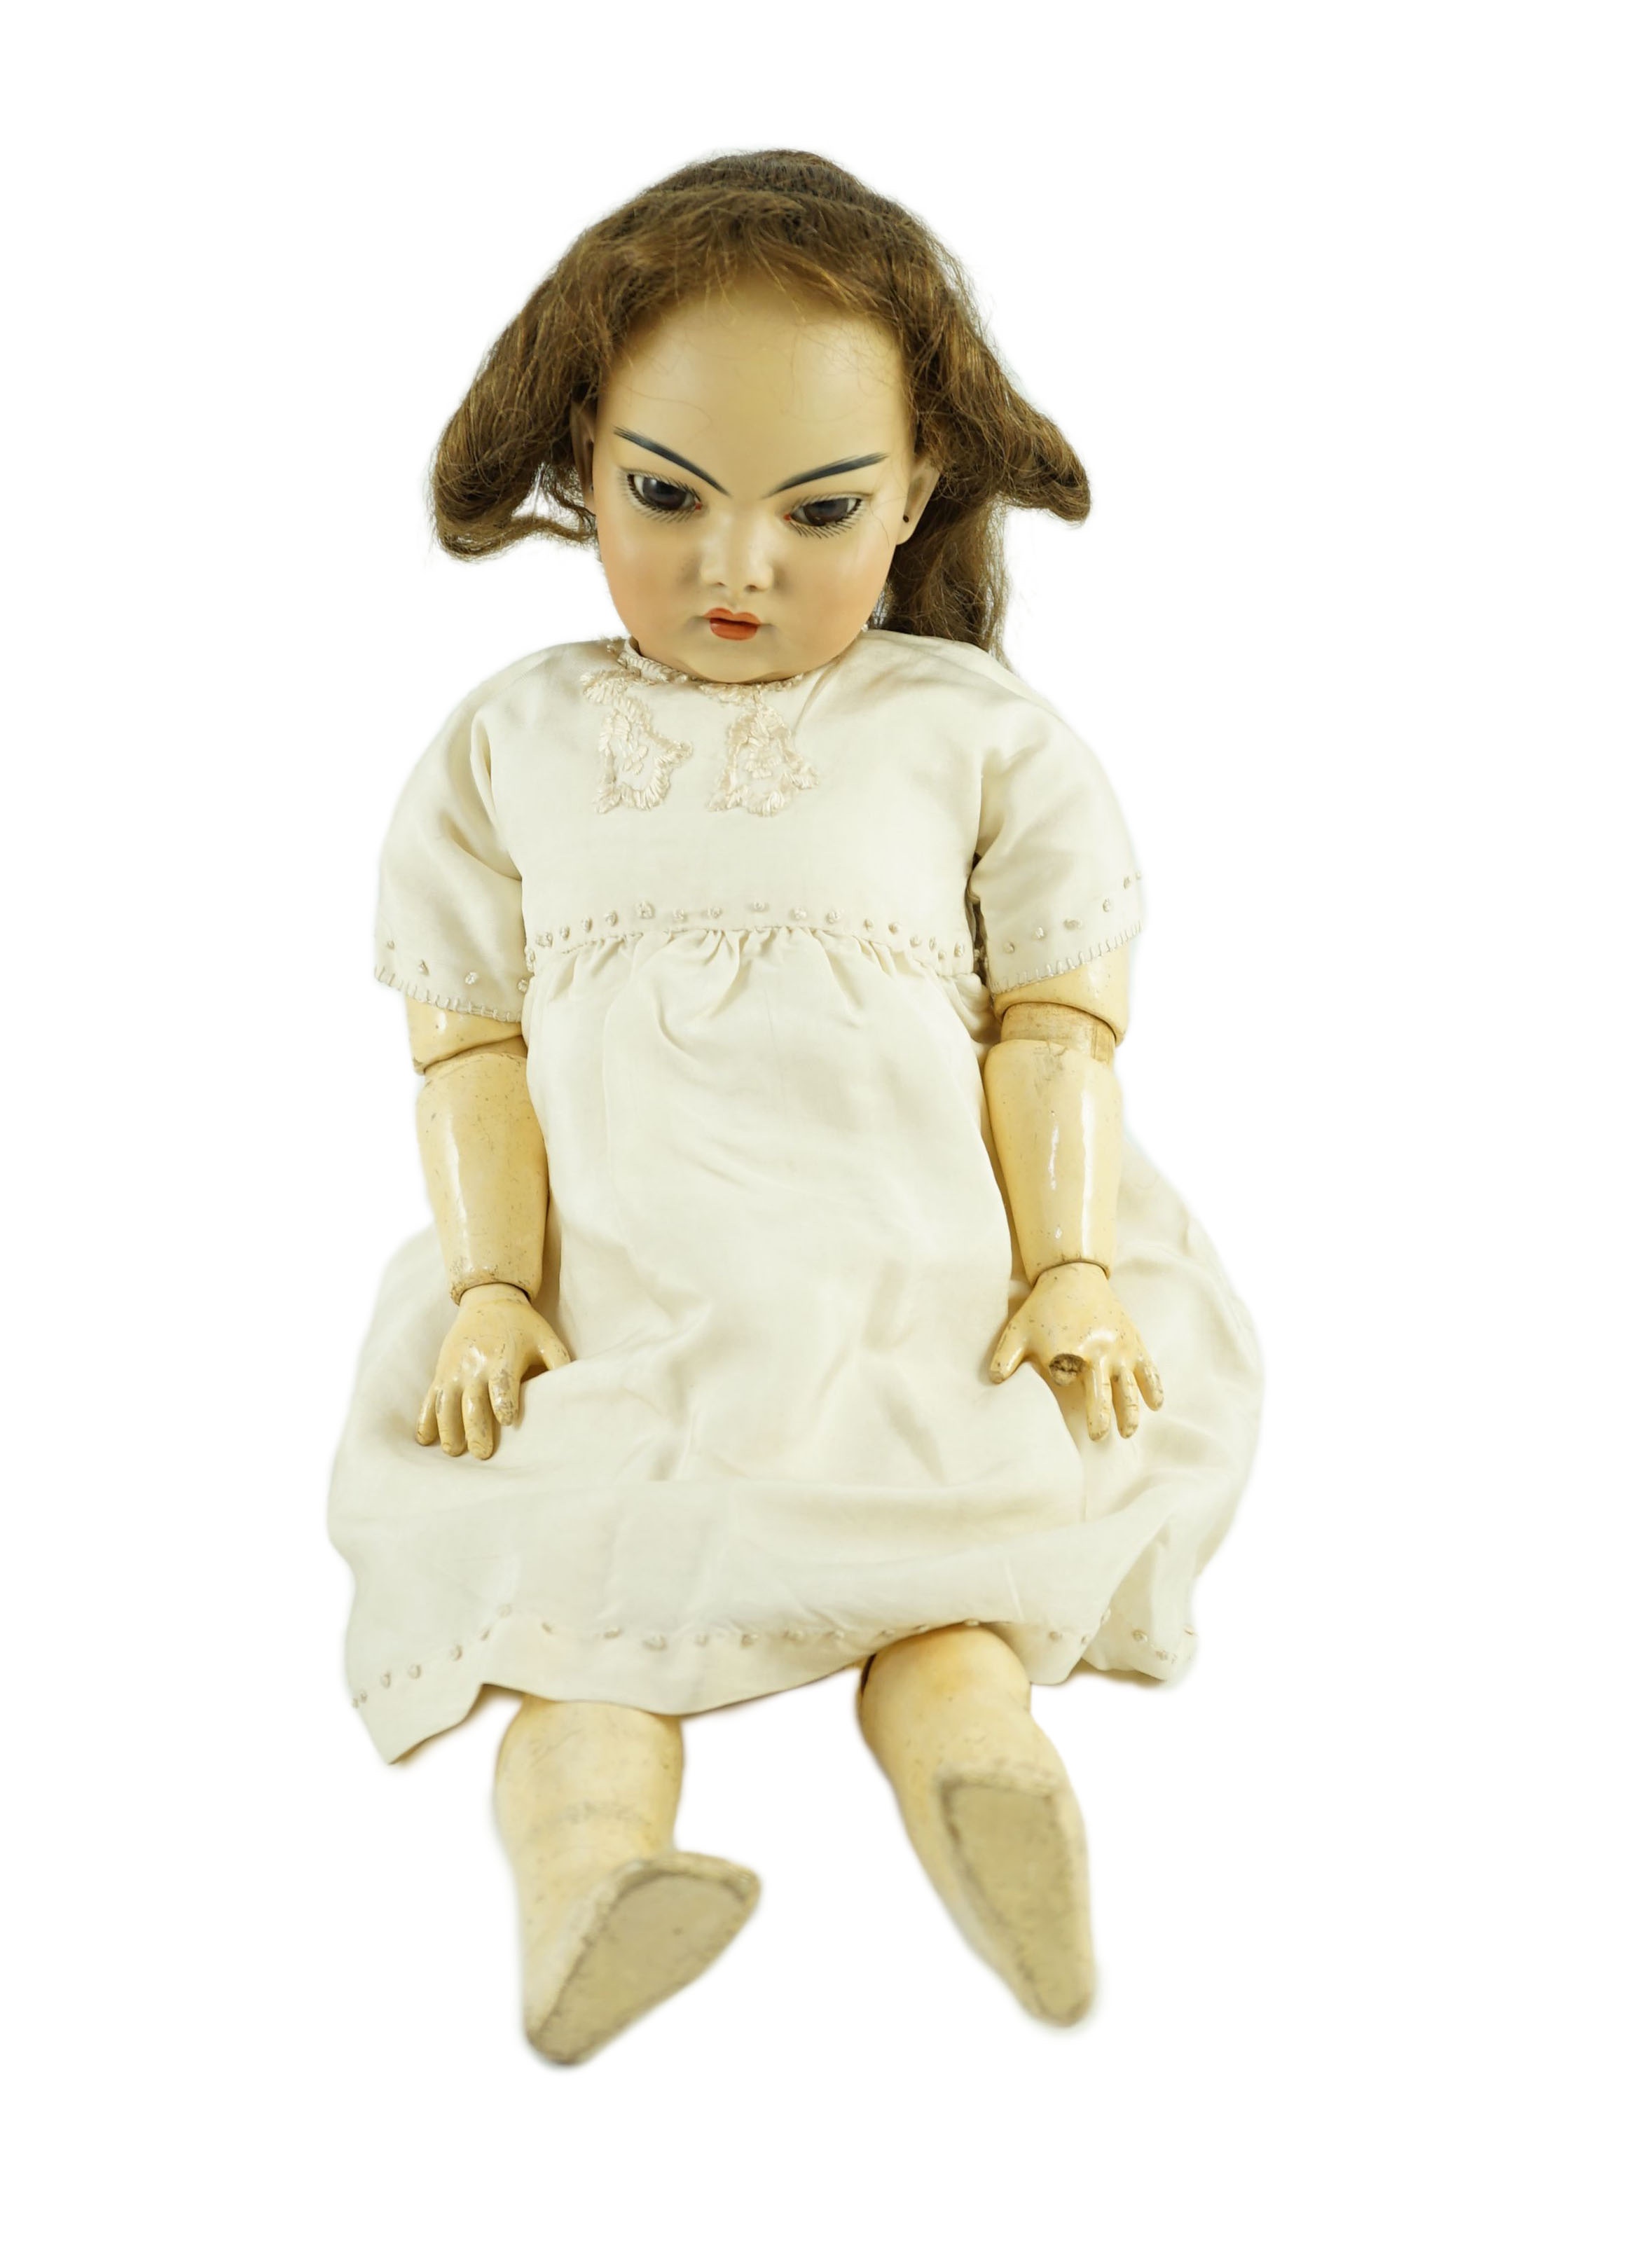 A Simon & Halbig bisque Oriental doll, 1099, height 46cm